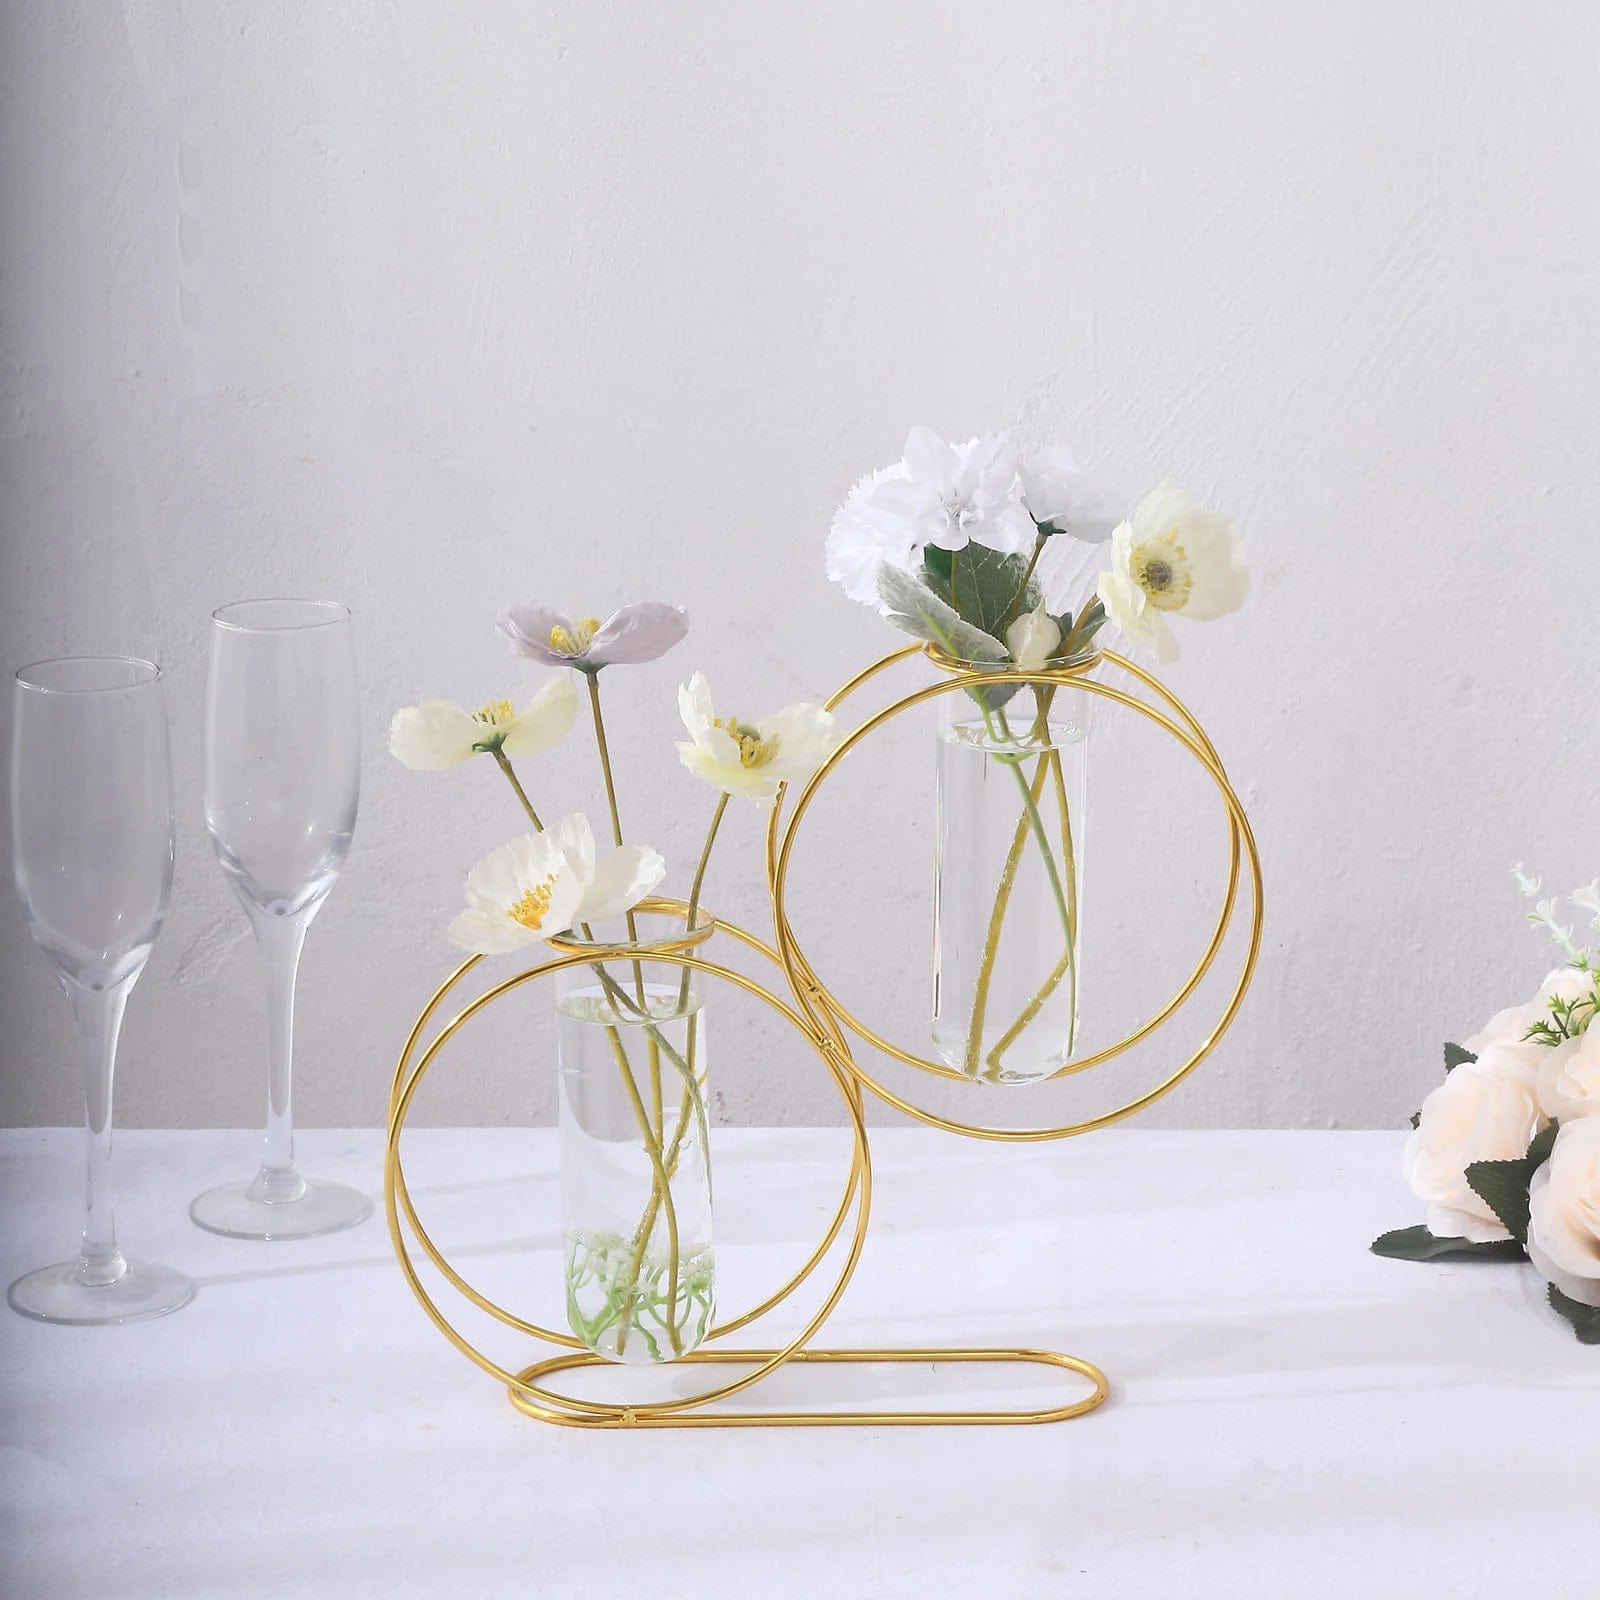 2 Gold 10 in Metal Geometric Double Ring Flower Vases with Clear Glass Tubes